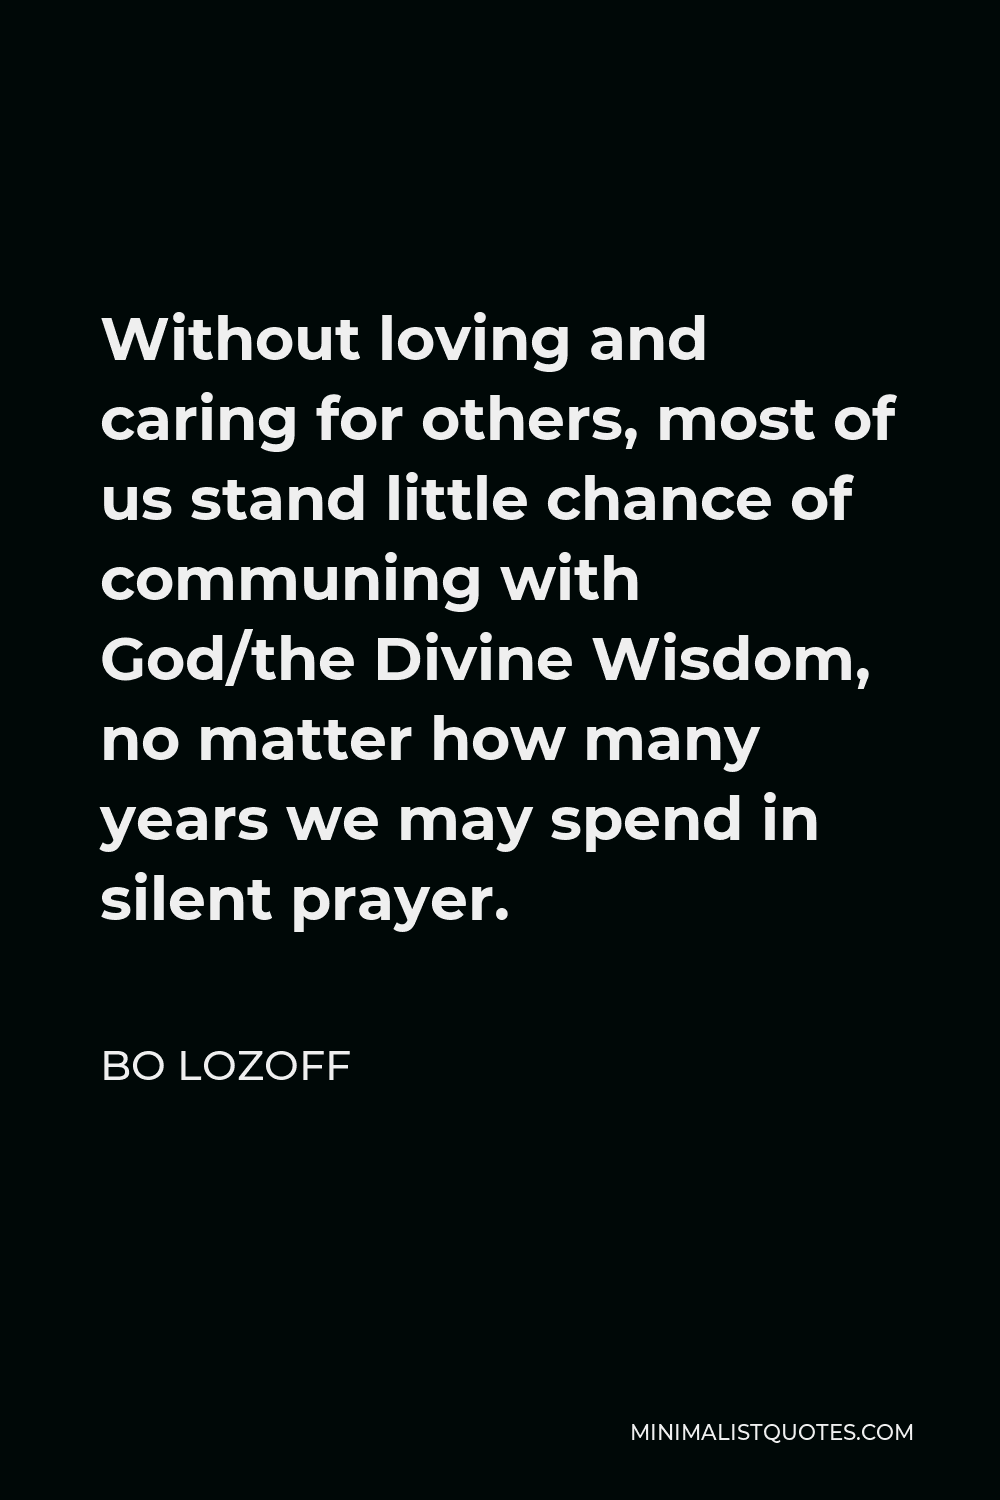 Bo Lozoff Quote - Without loving and caring for others, most of us stand little chance of communing with God/the Divine Wisdom, no matter how many years we may spend in silent prayer.